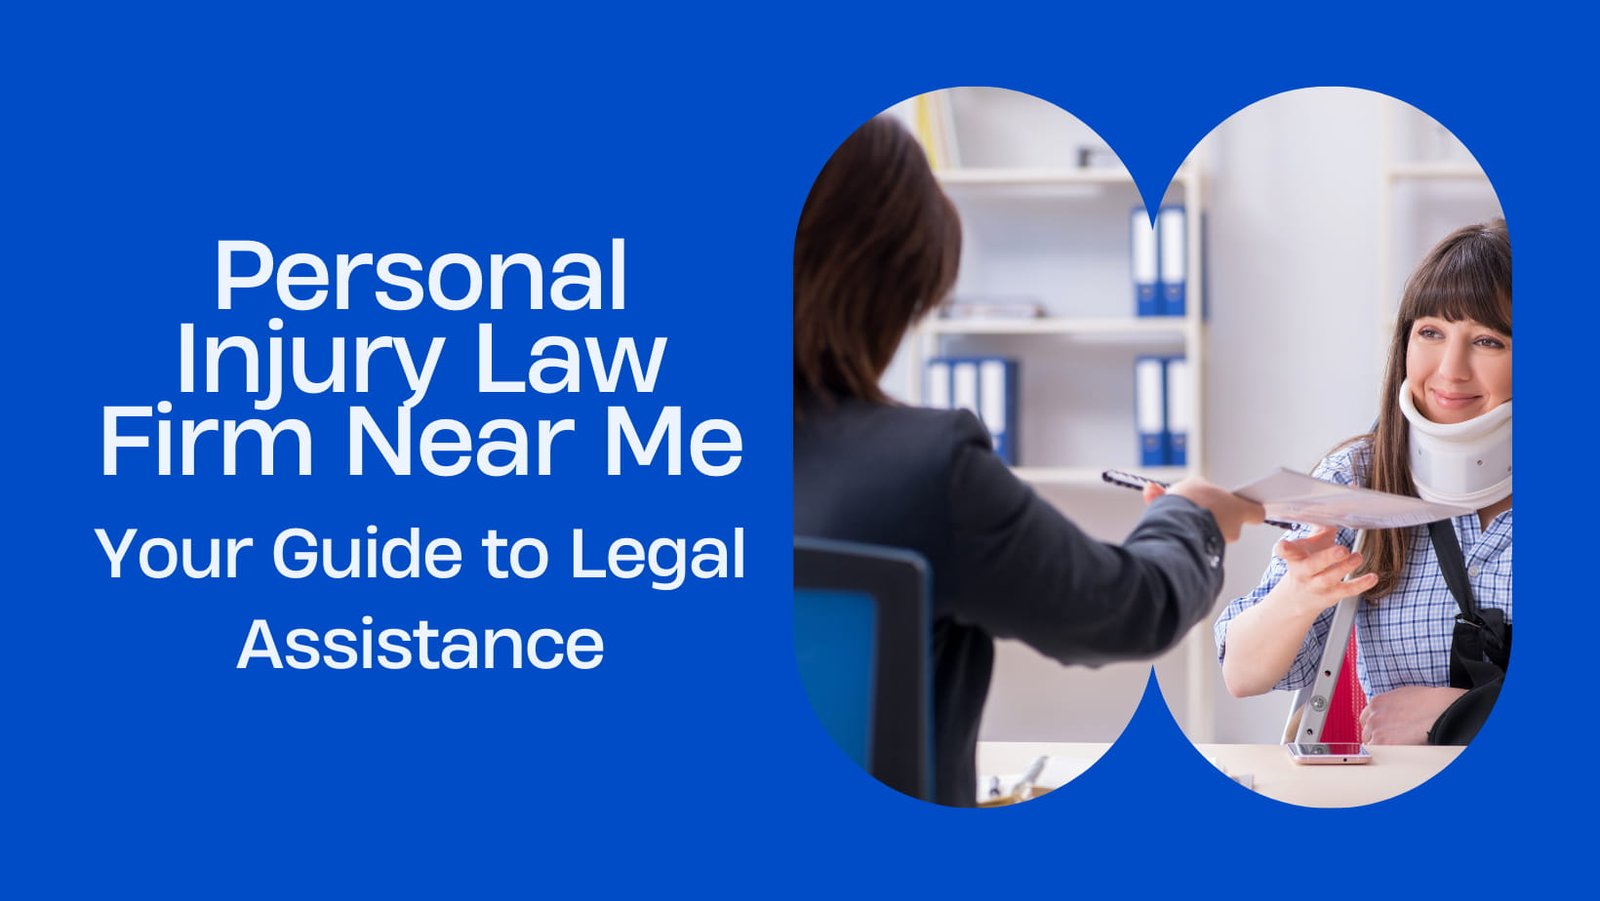 Personal Injury Law Firm Near Me: Your Guide to Legal Assistance